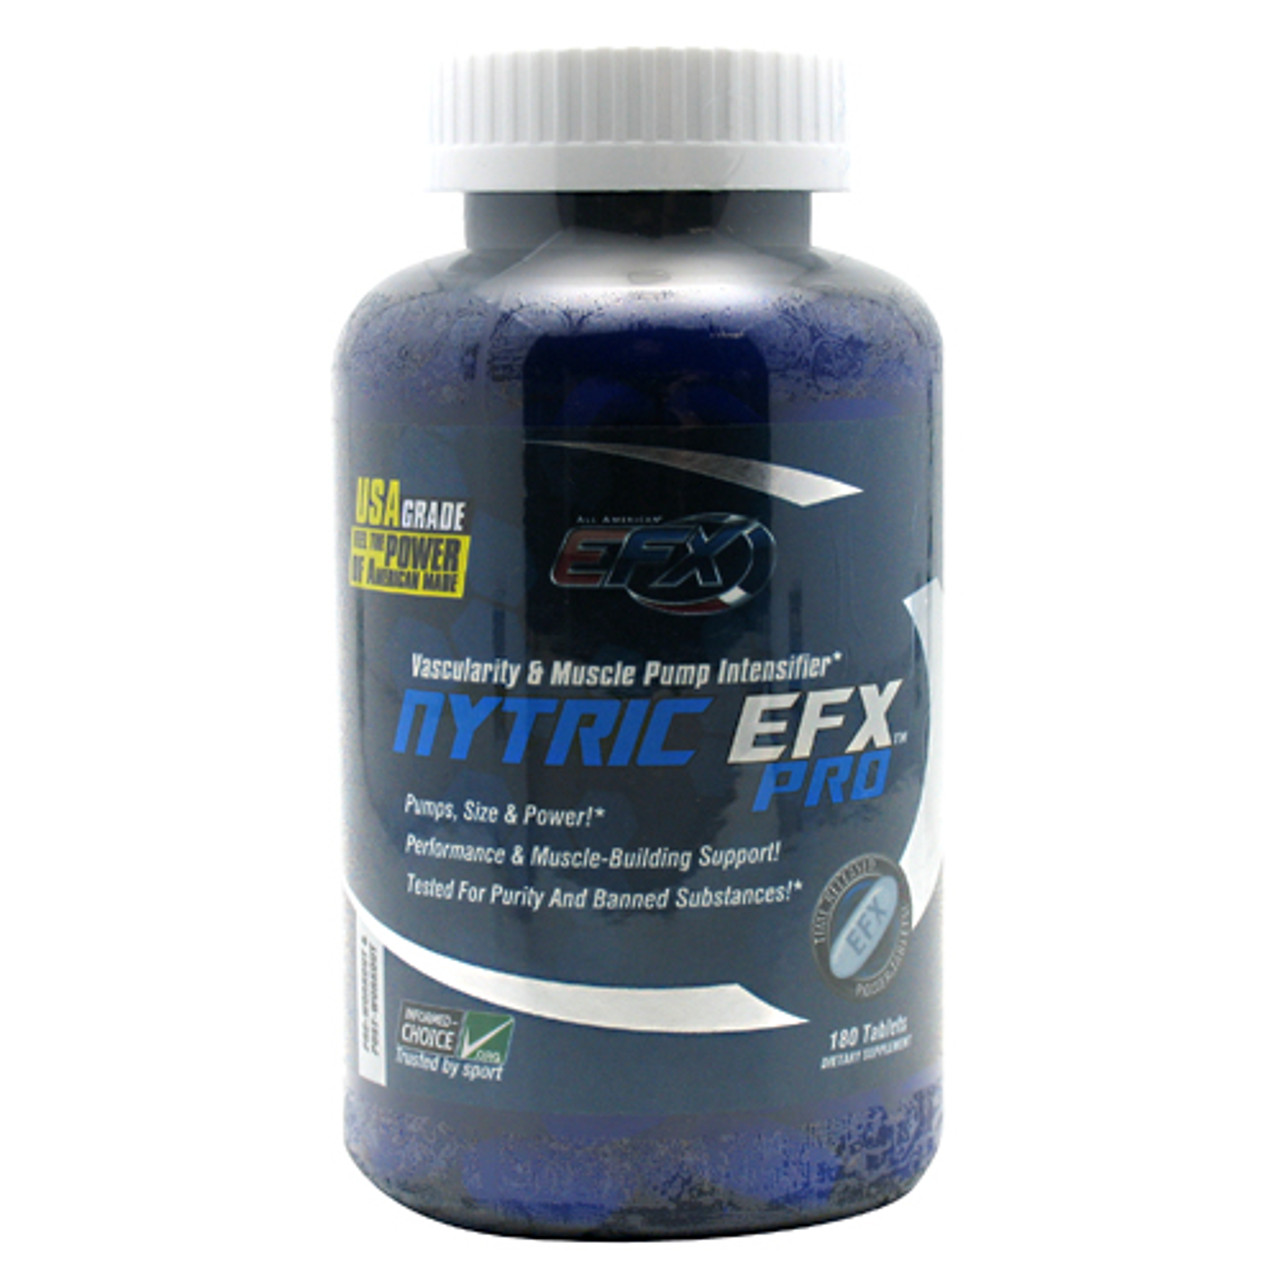 Nytric EFX Pro 180ct All American EFX